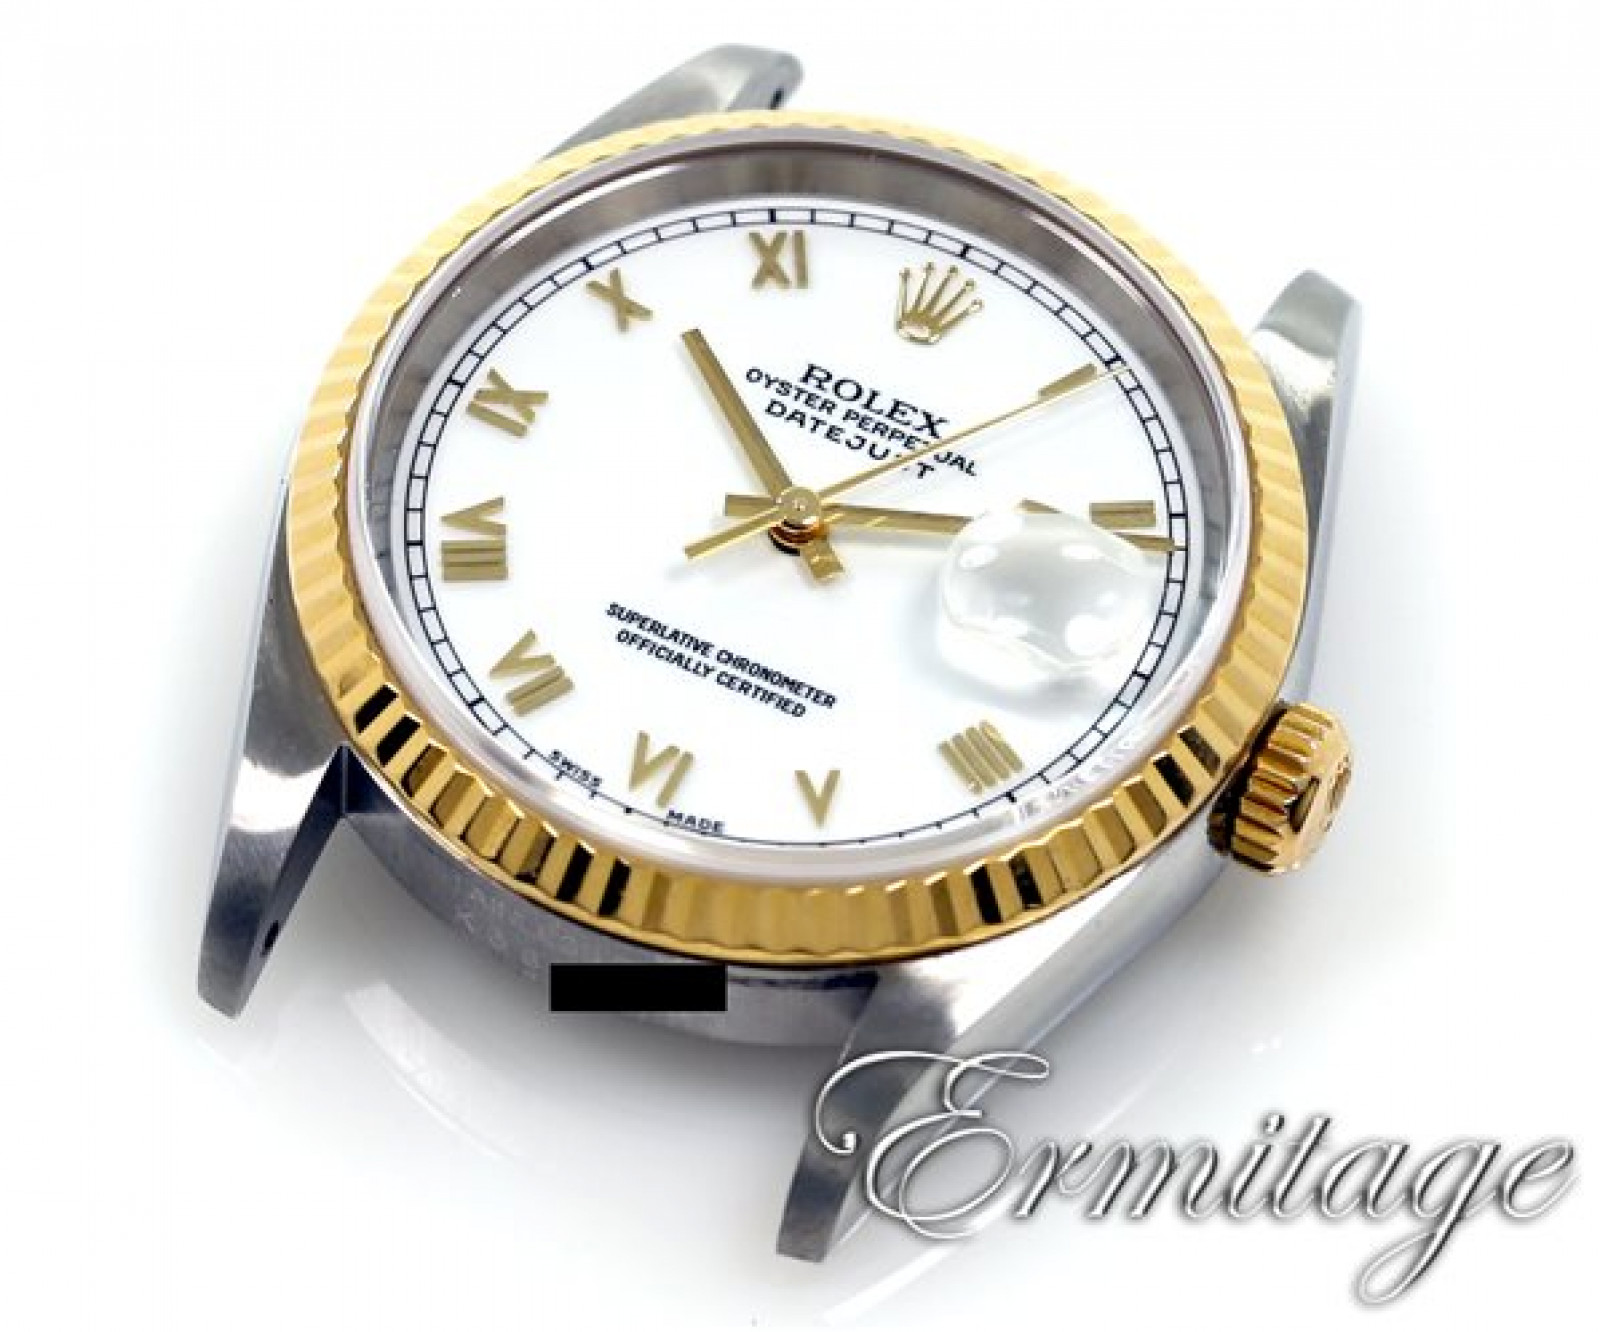 Preowned Rolex Datejust 16233